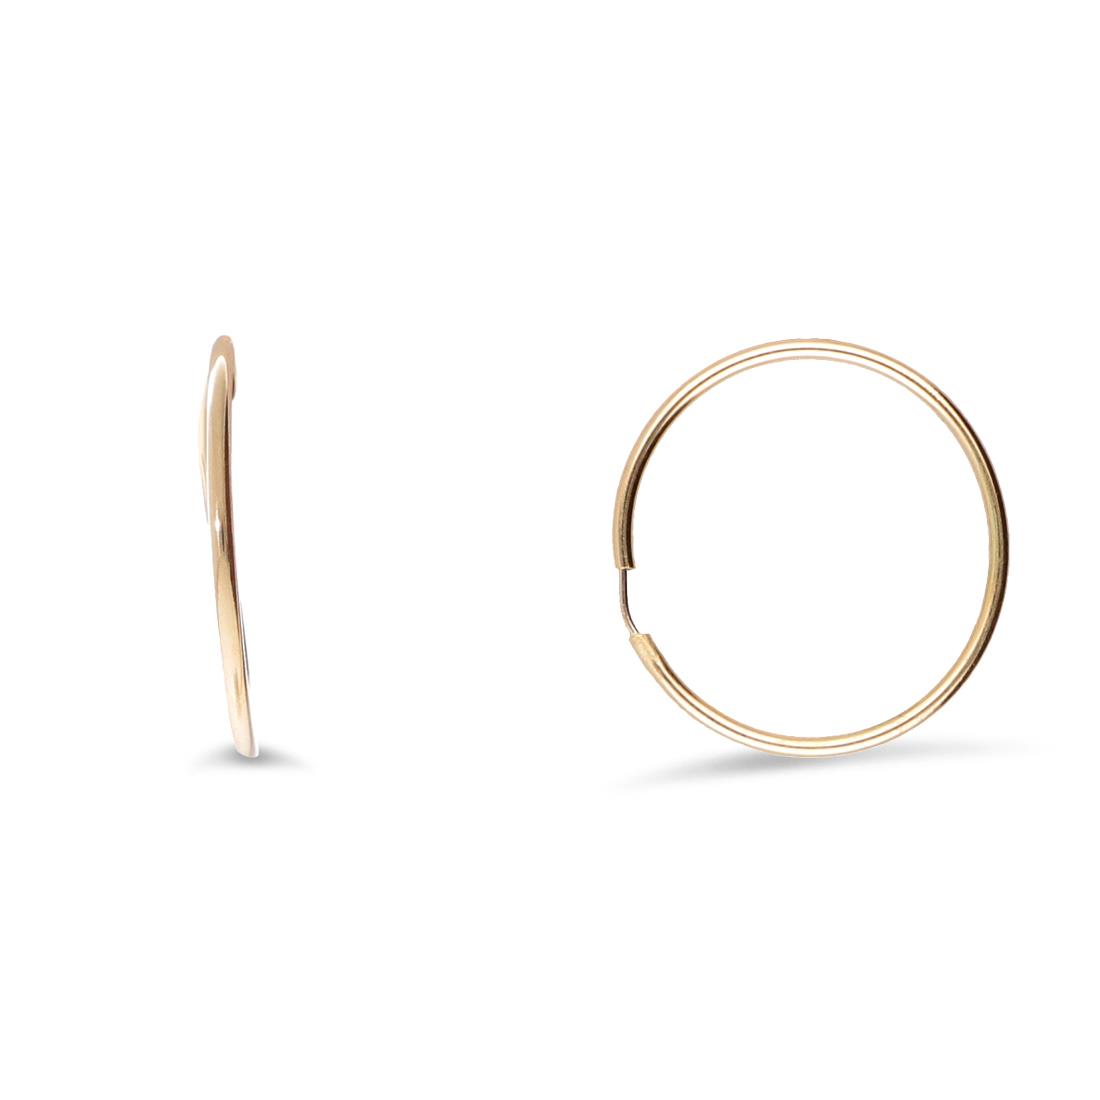 Round earrings in gold - ORO&CO